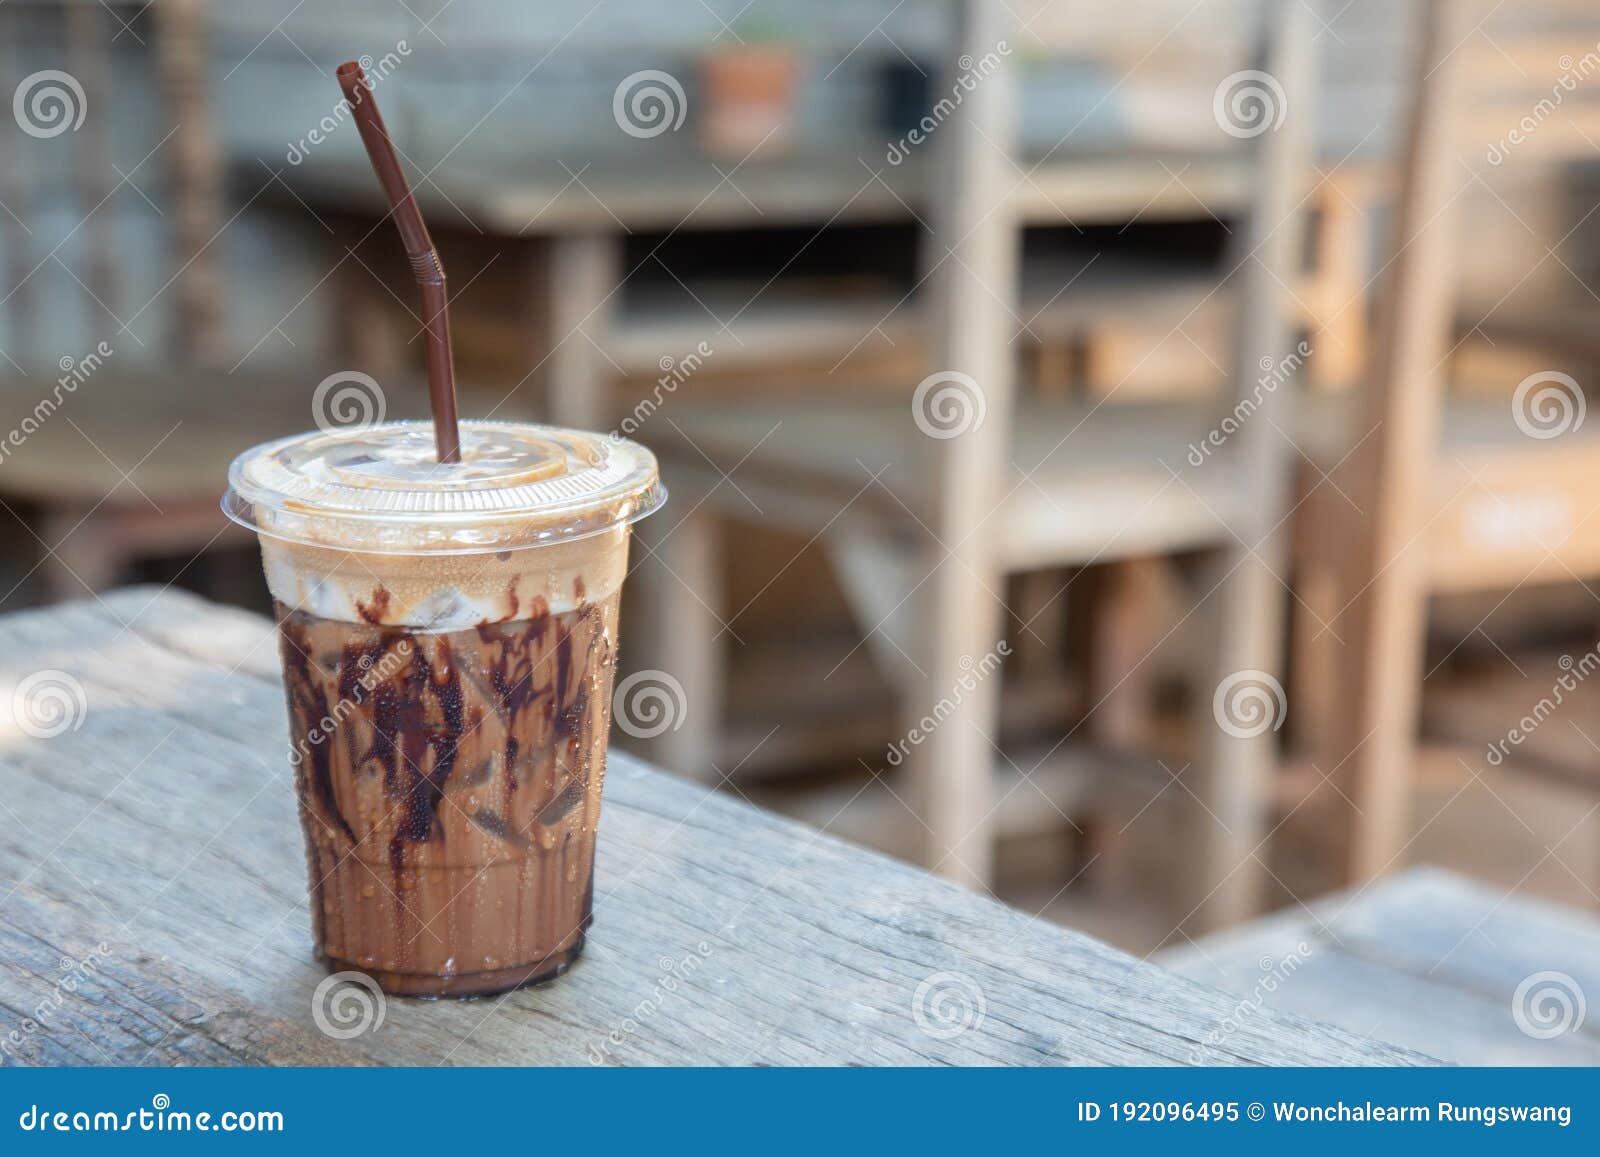 https://thumbs.dreamstime.com/z/close-up-shot-blurred-background-iced-beverage-chocolate-cocoa-mocha-coffee-clear-plastic-cup-put-vintage-wooden-192096495.jpg